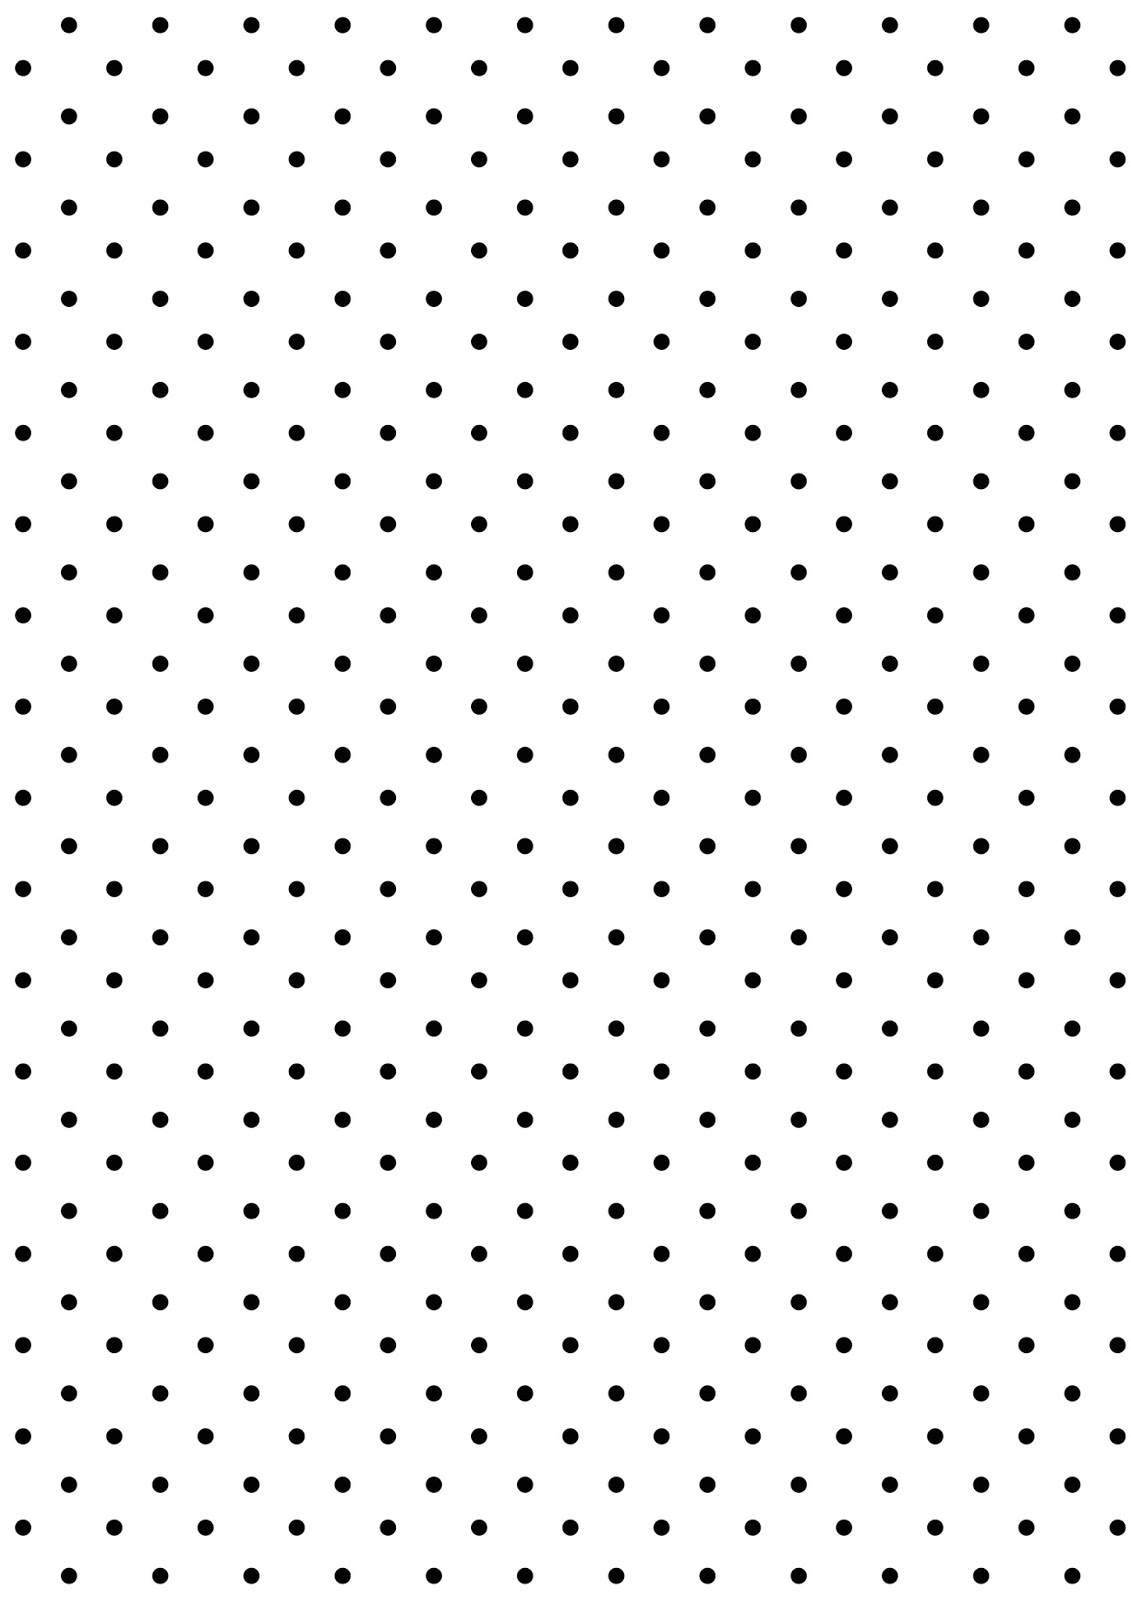 8-best-images-of-free-printable-black-and-white-pattern-paper-free